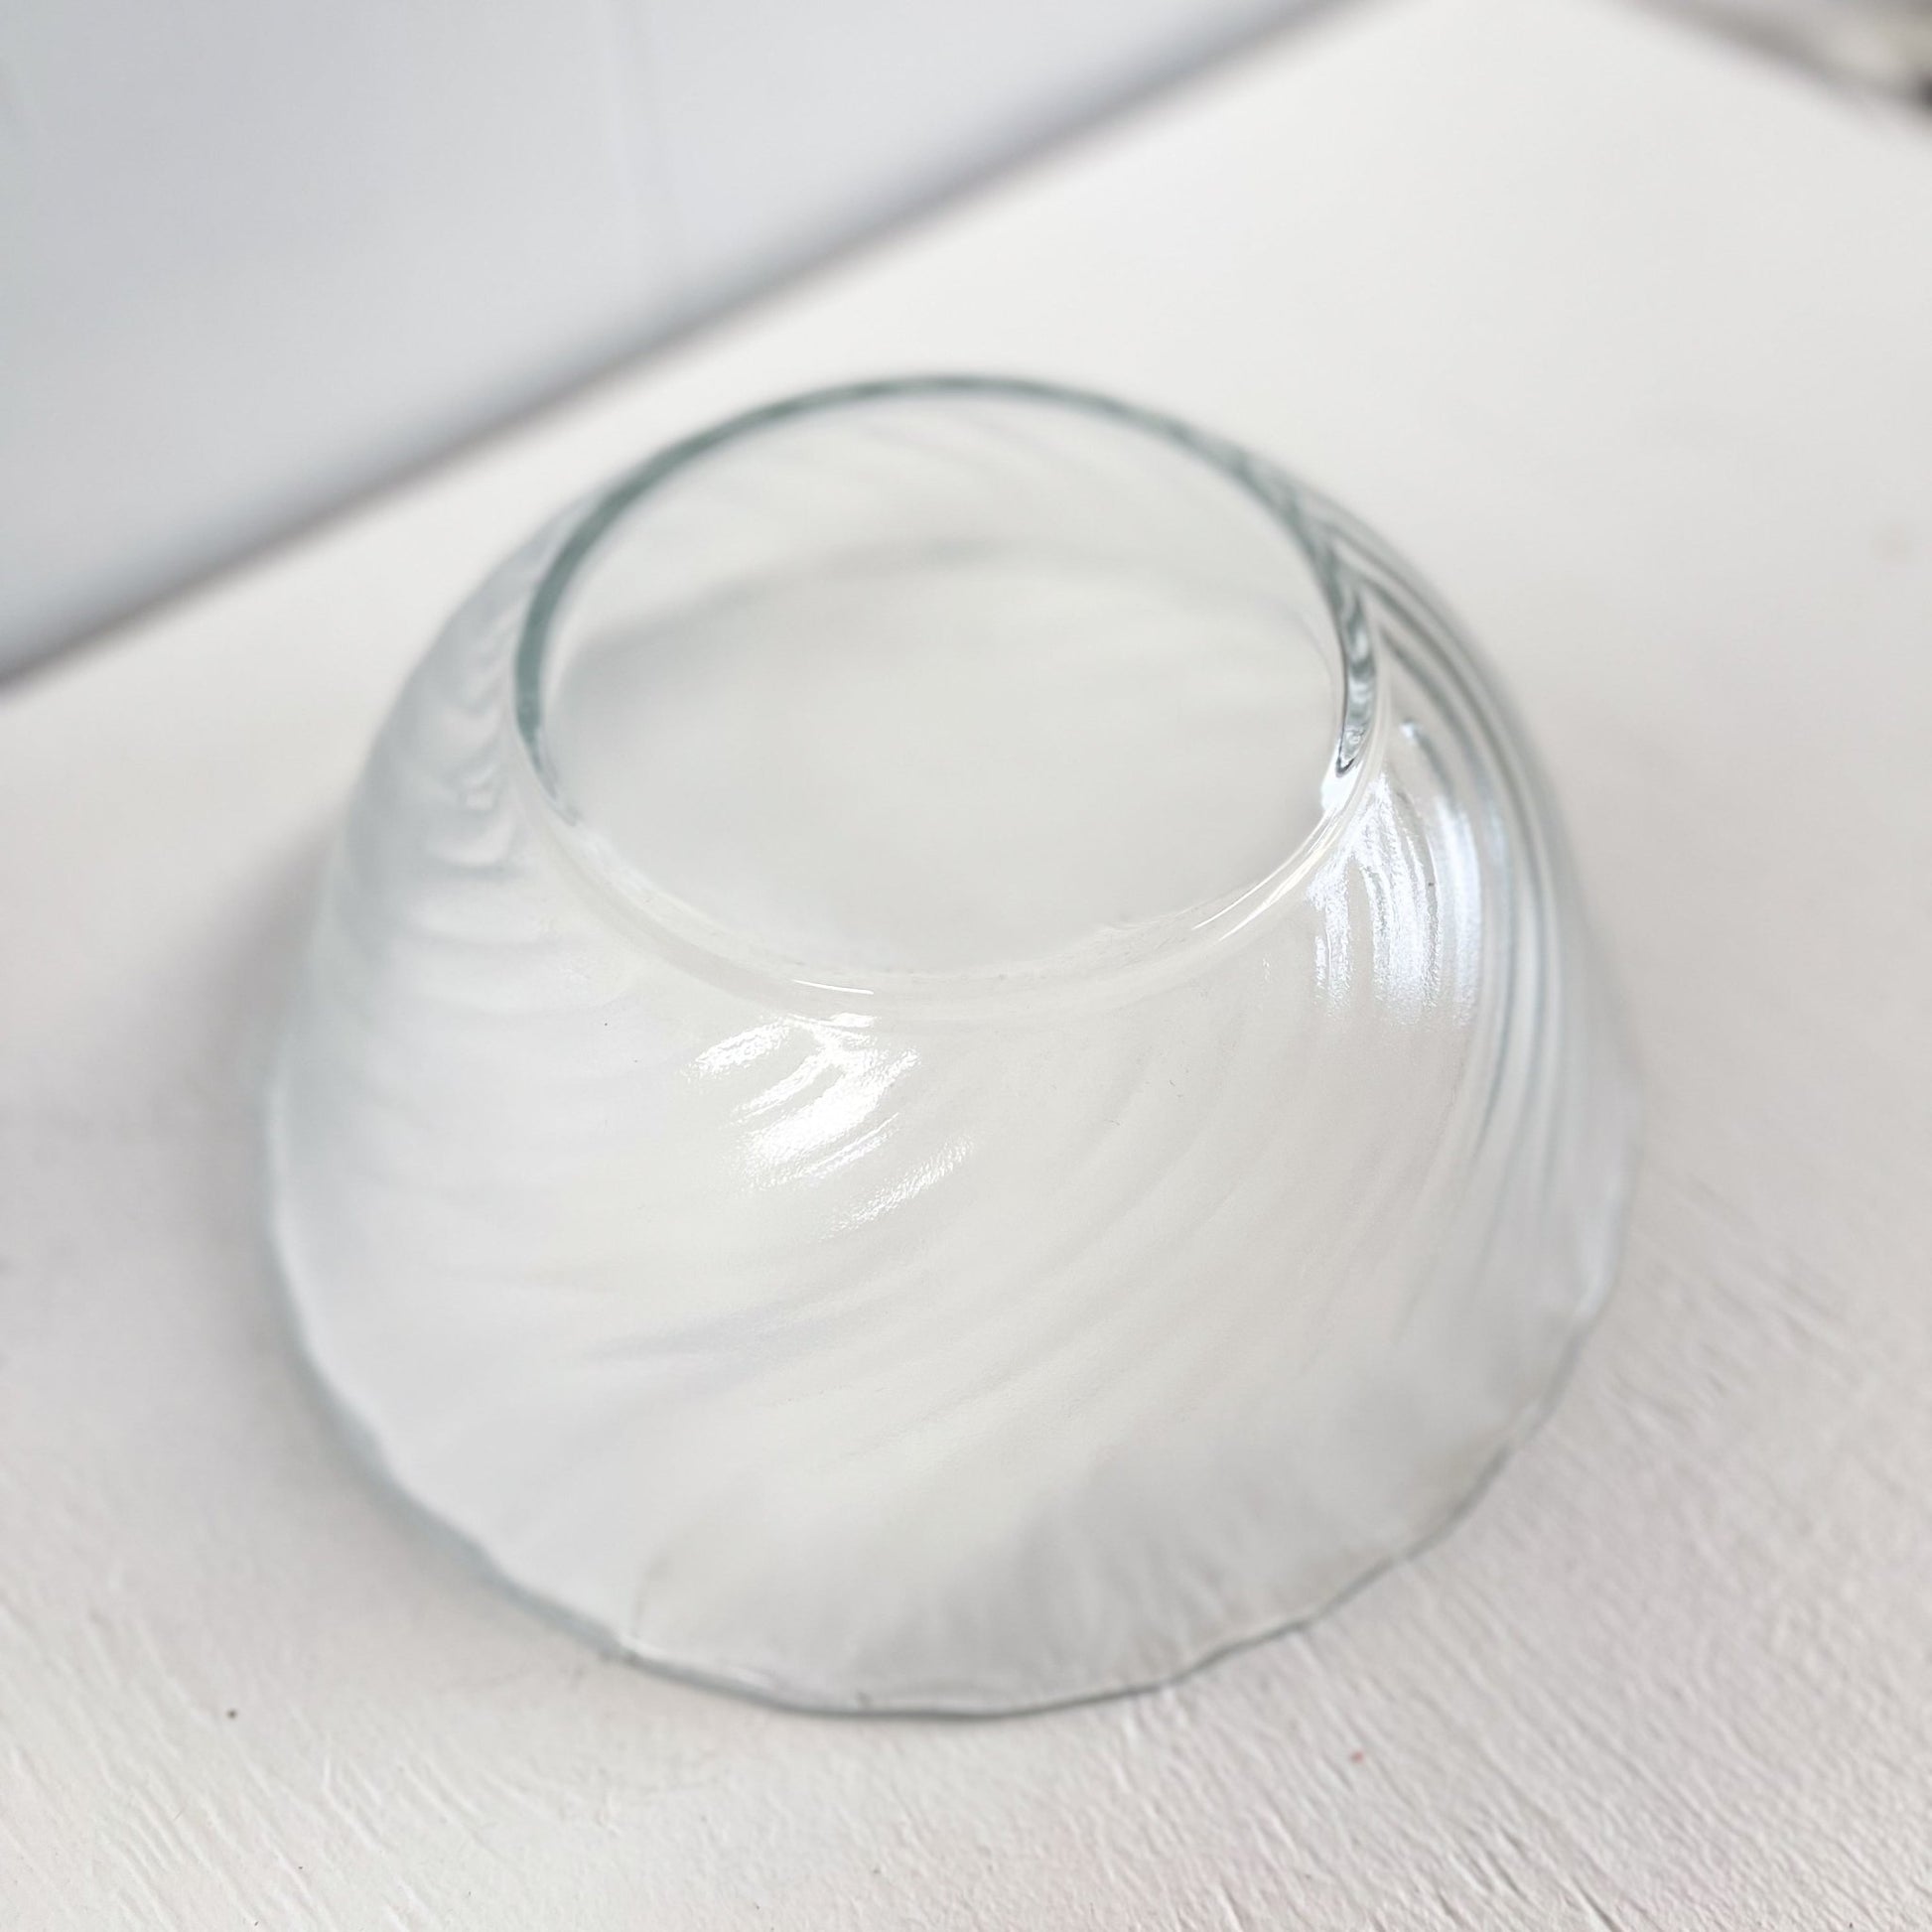 Swirl Frosted Glass Serving Bowl by Arcoroc-Arc International-Serving Bowl-Stockton Farm